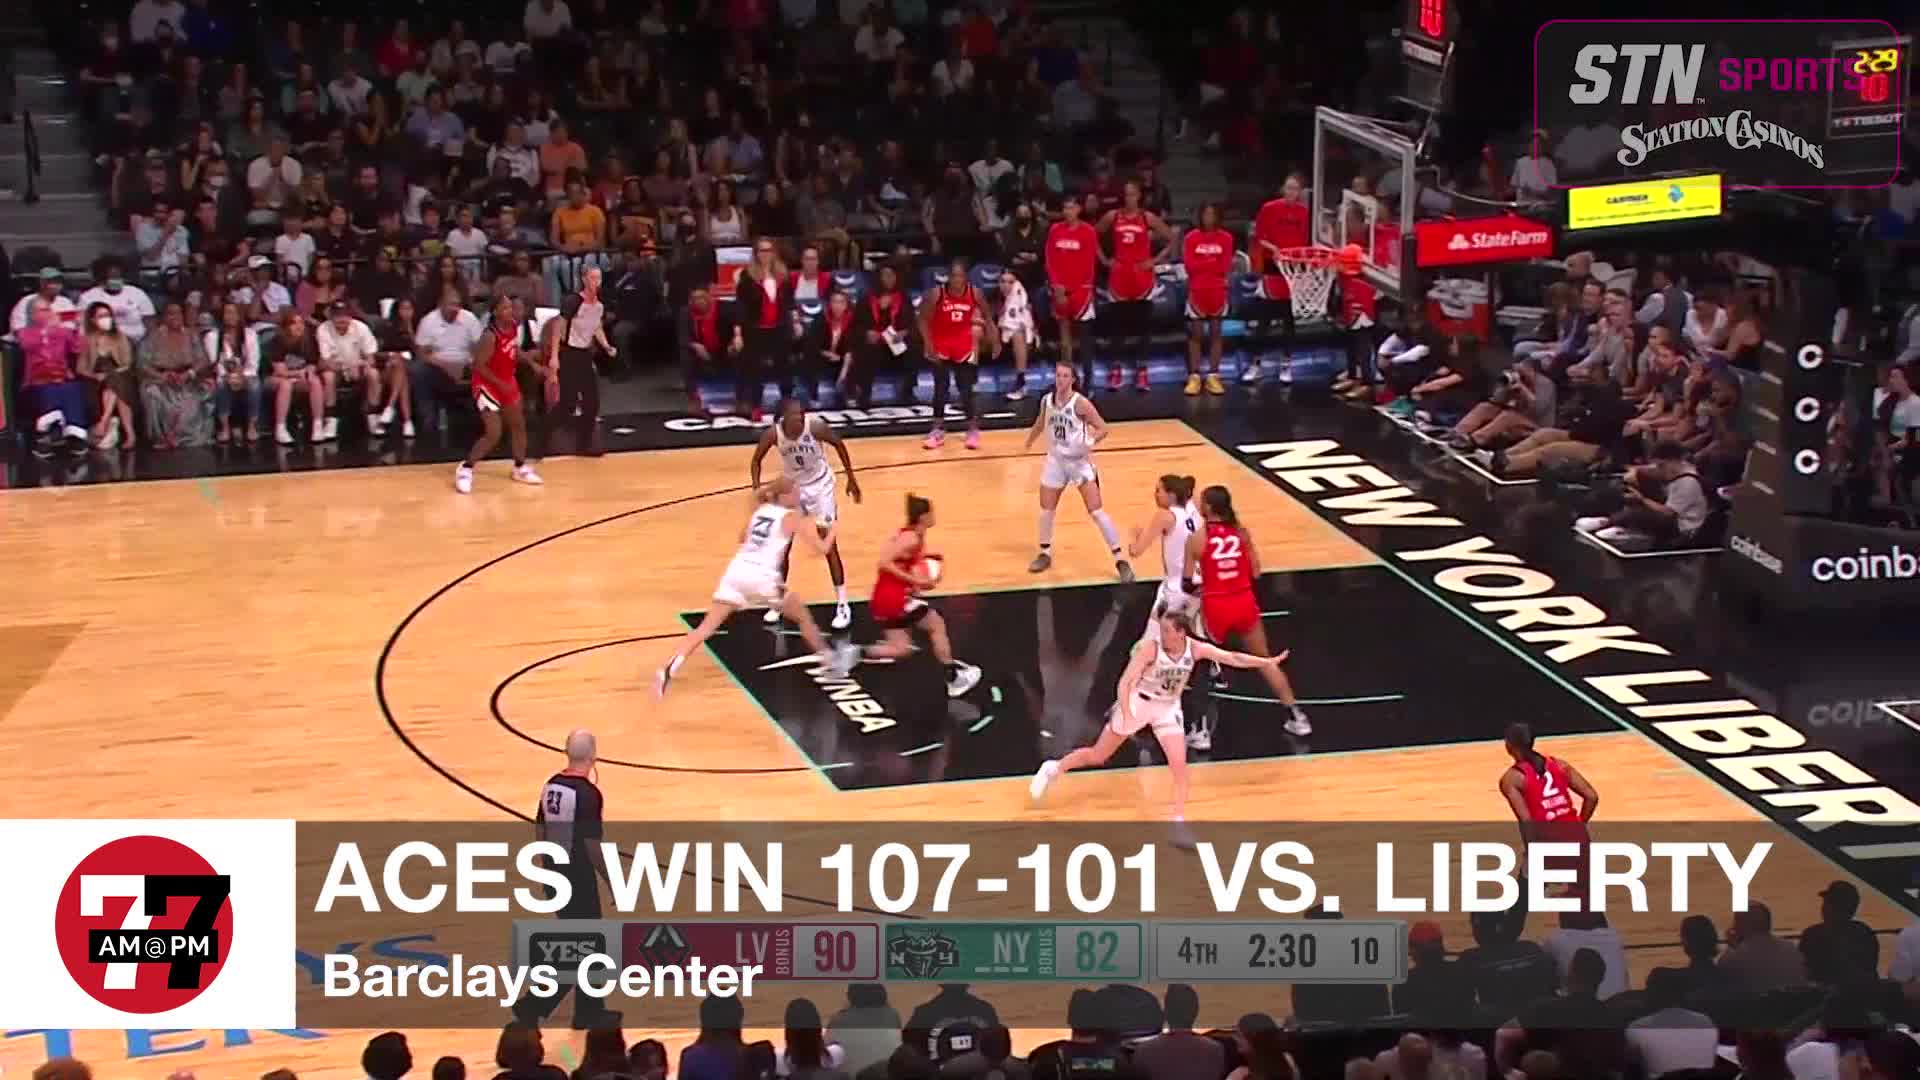 Las Vegas Aces win after the WNBA All Star Game